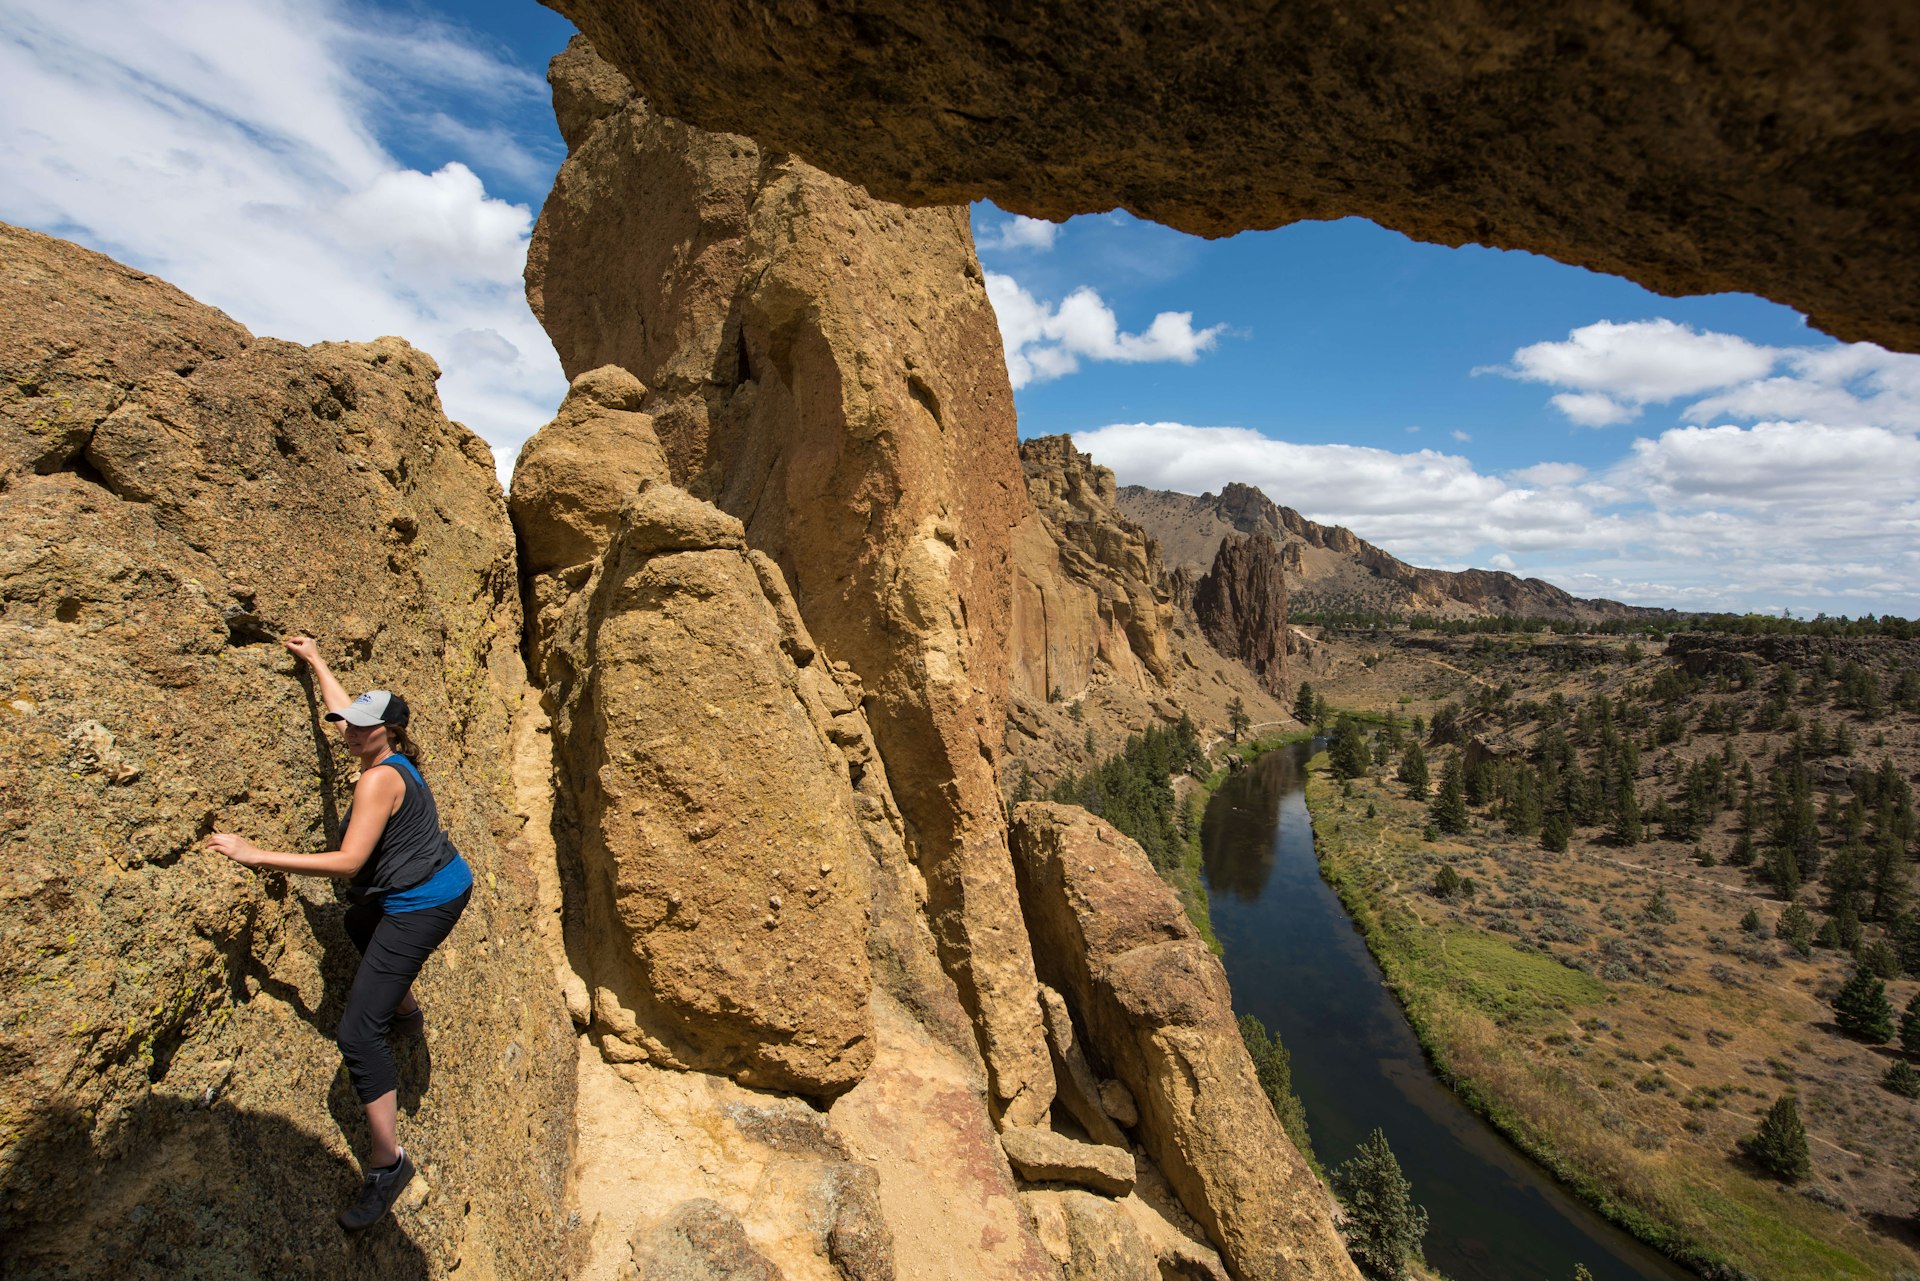 Climbing Smith Rock State Park in Bend, Oregon